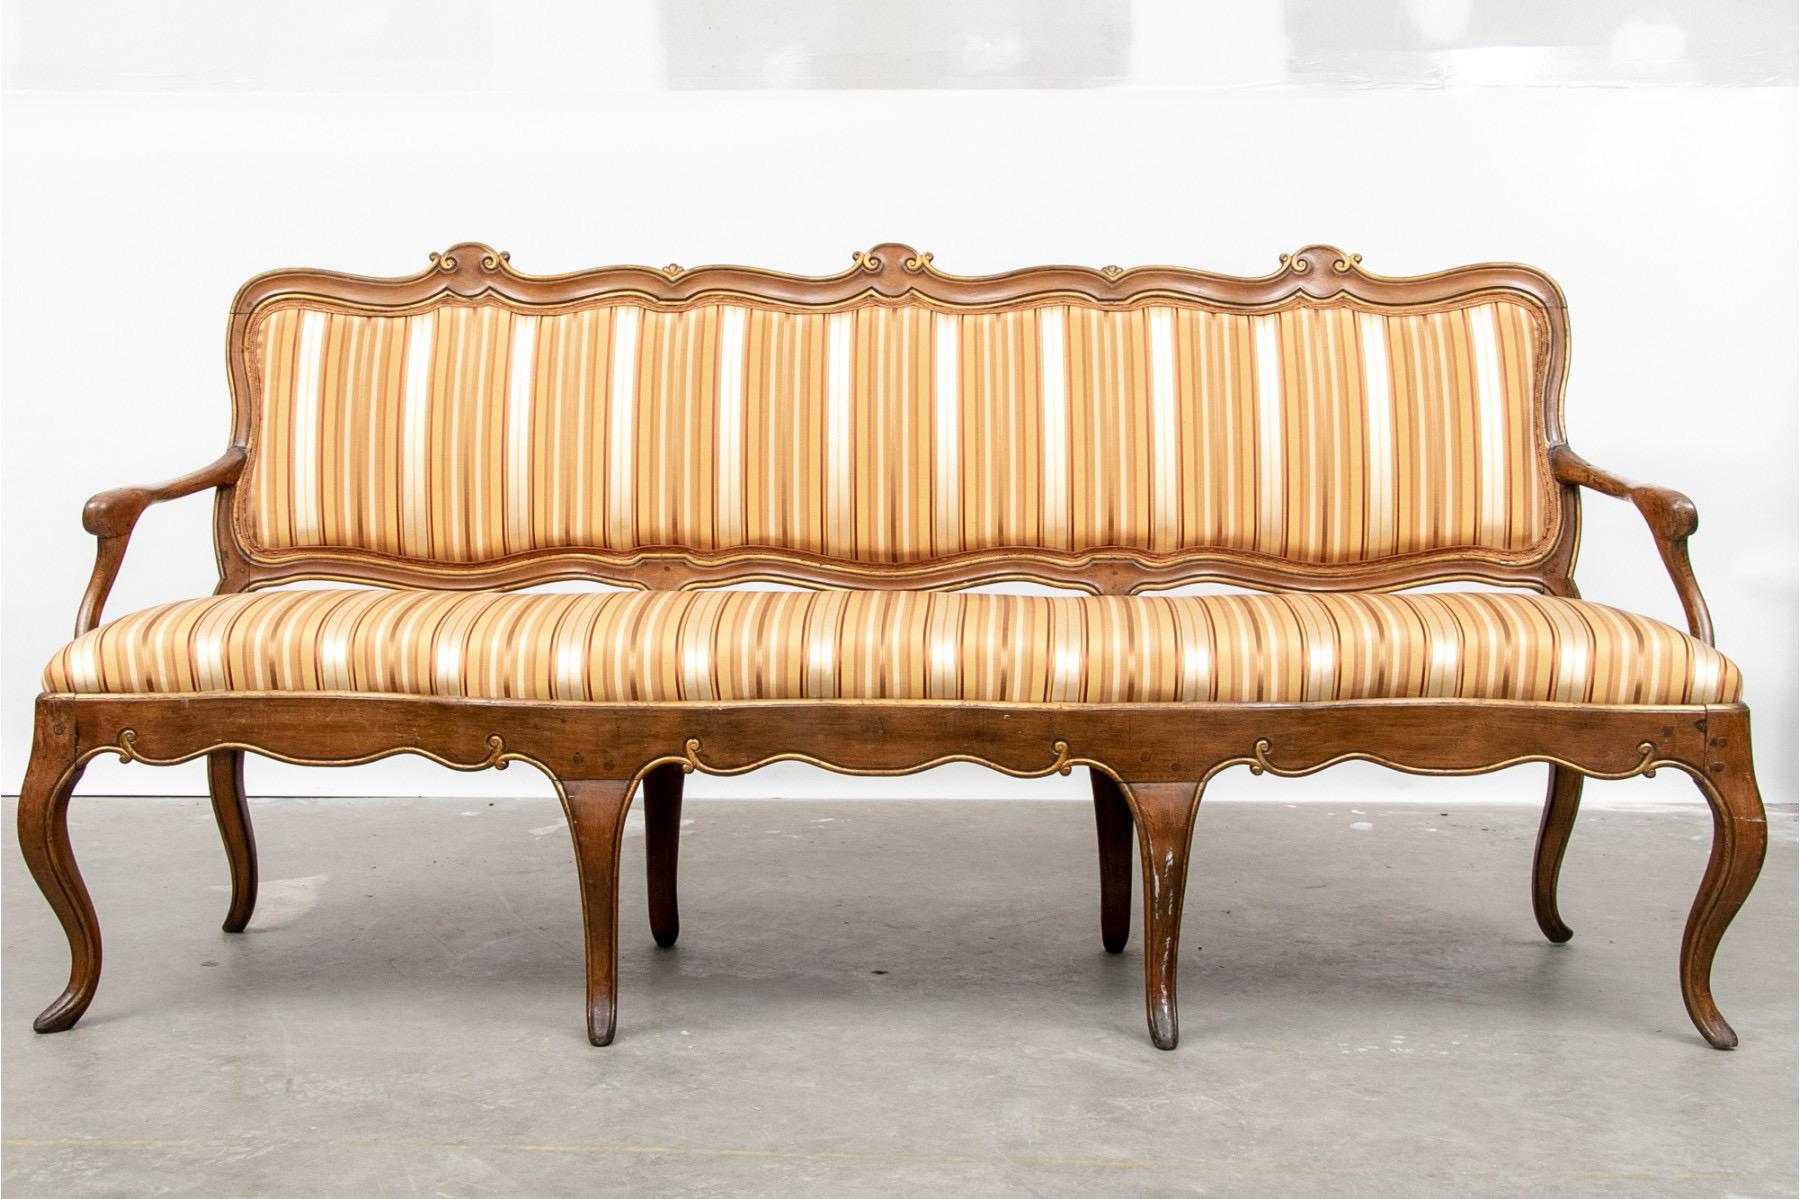 Late 18th century Swedish walnut sofa with traces of partial gilt. The hand carved frame has intricate decorations and a beautiful patina. The sofa is upholstered in a striped silk fabric. Good vintage condition, but is fragile and not intended for